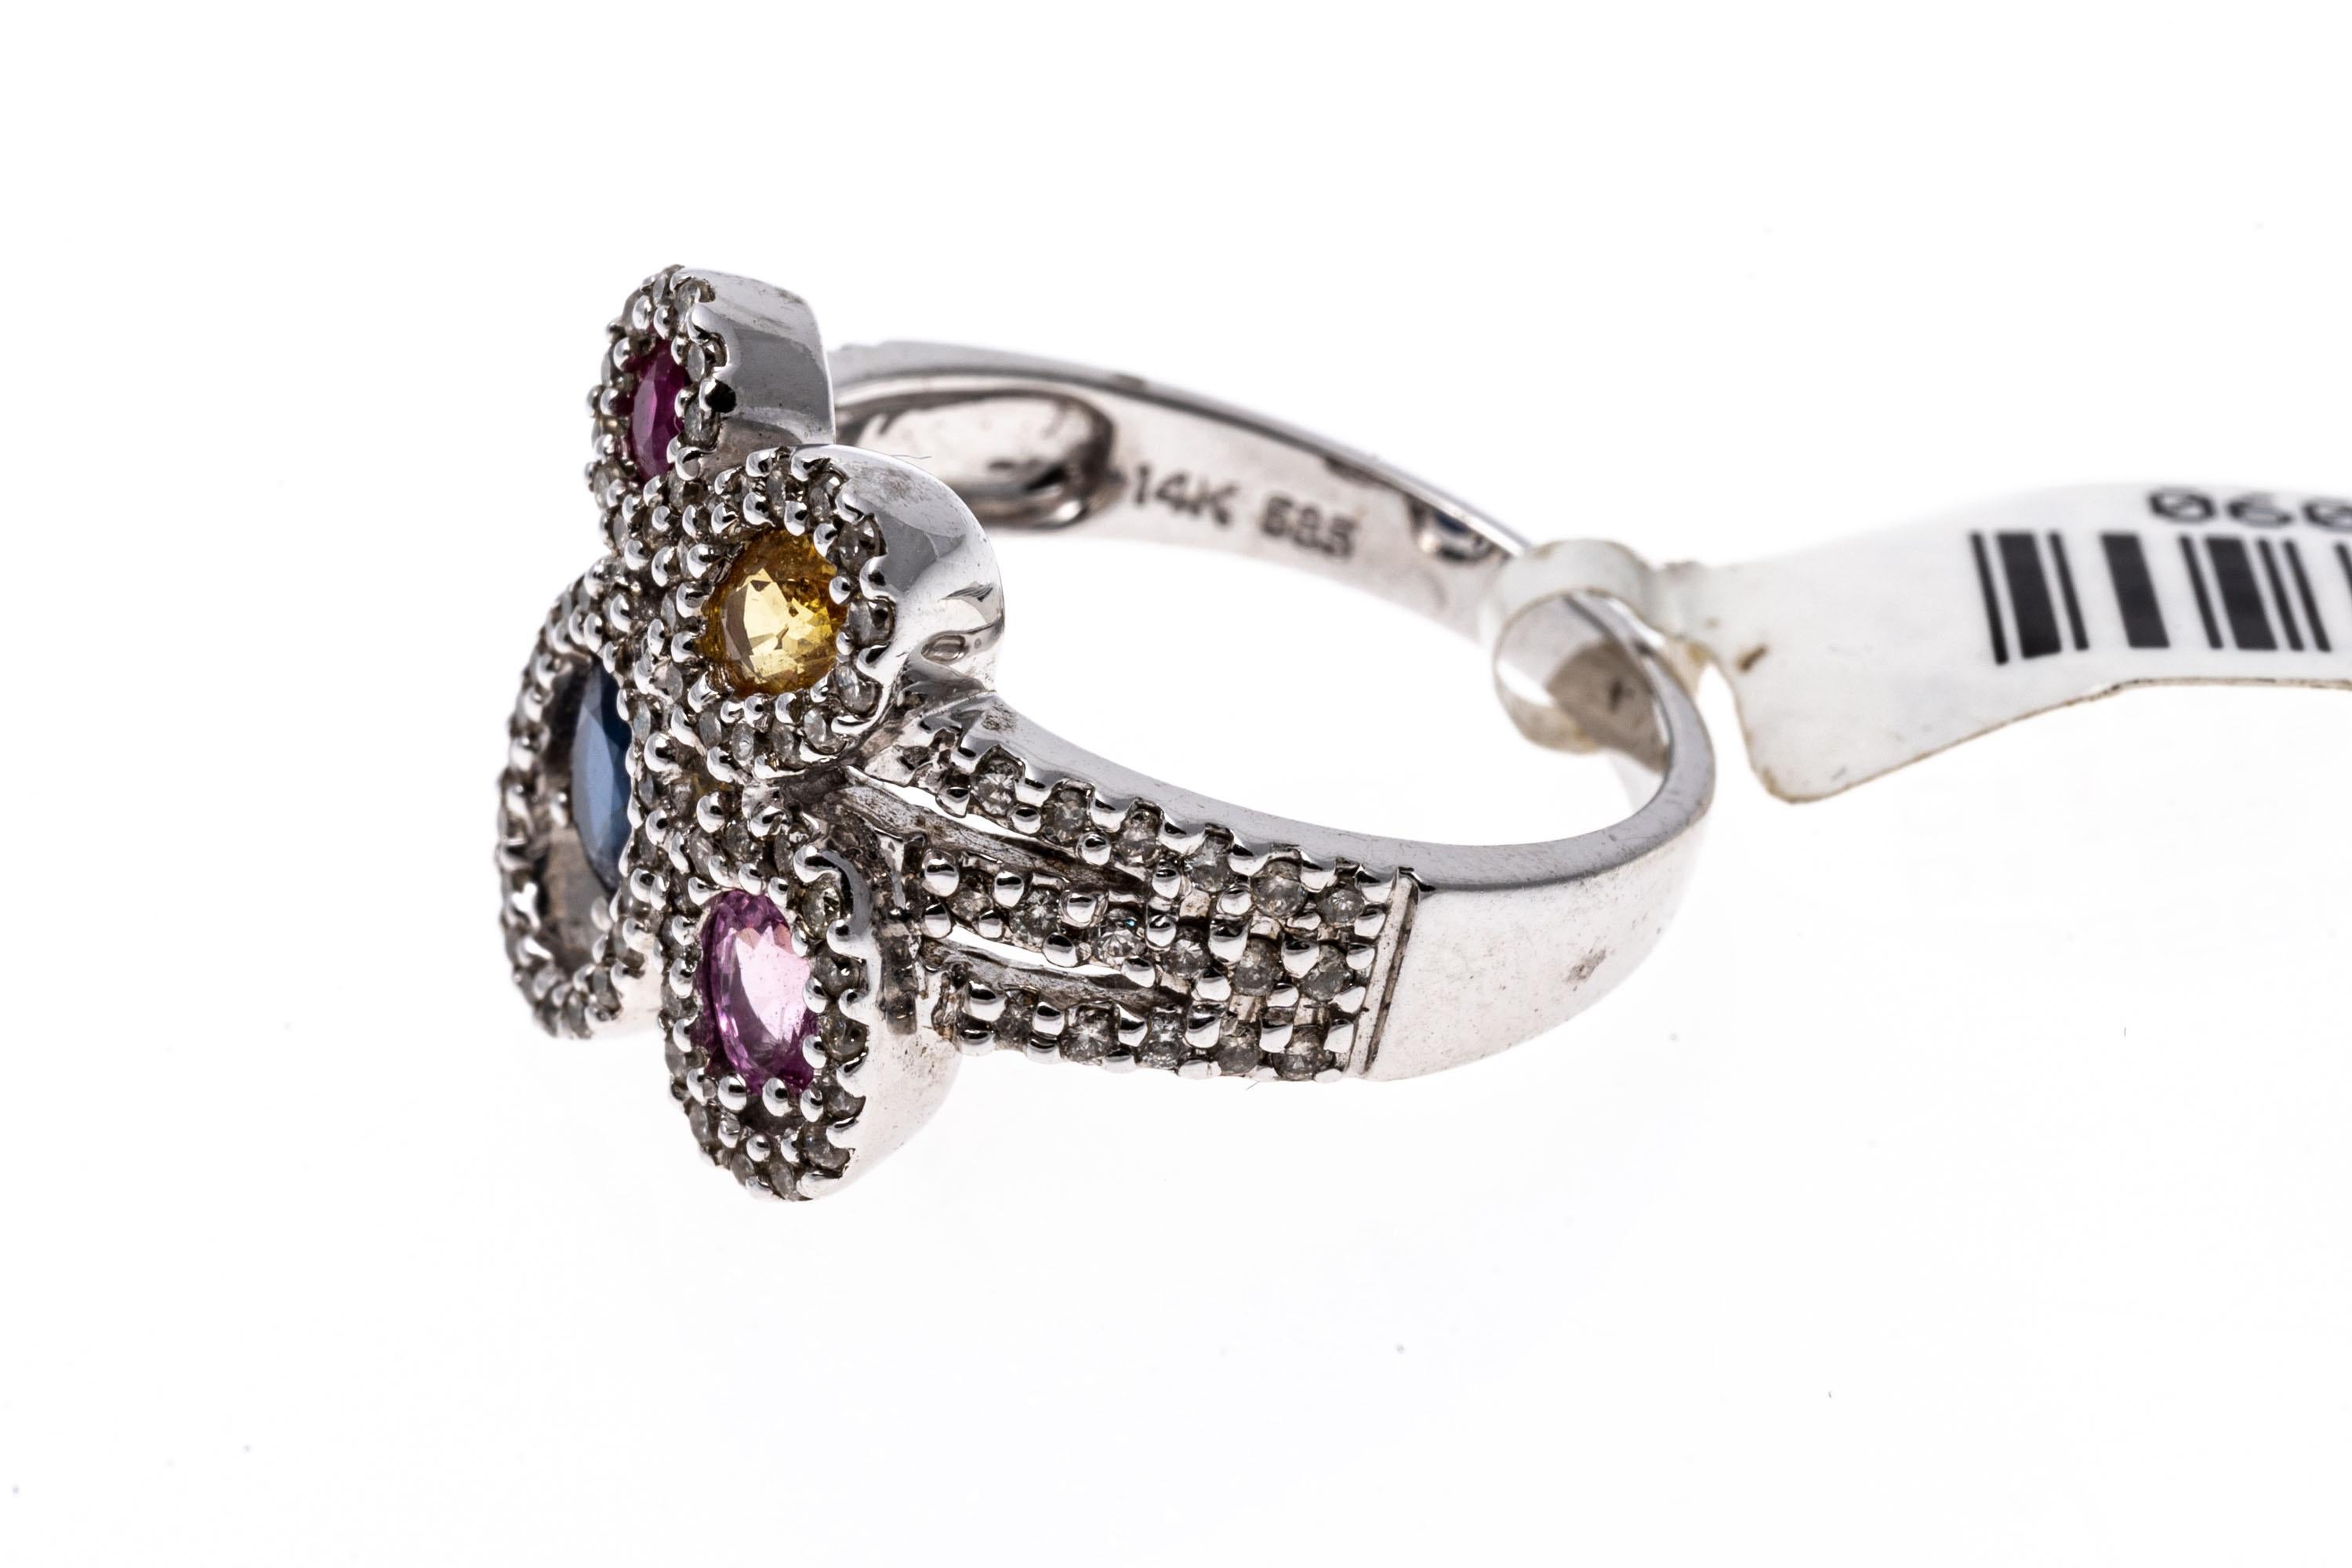 14K Ring Of Diamonds And Colorful Sapphires
A unique and abstract design of colorful sapphires and diamonds set over a 14K white gold ring. This whimisical ring features oval cut blue, pink and yellow sapphire with a single round cut ruby, framing